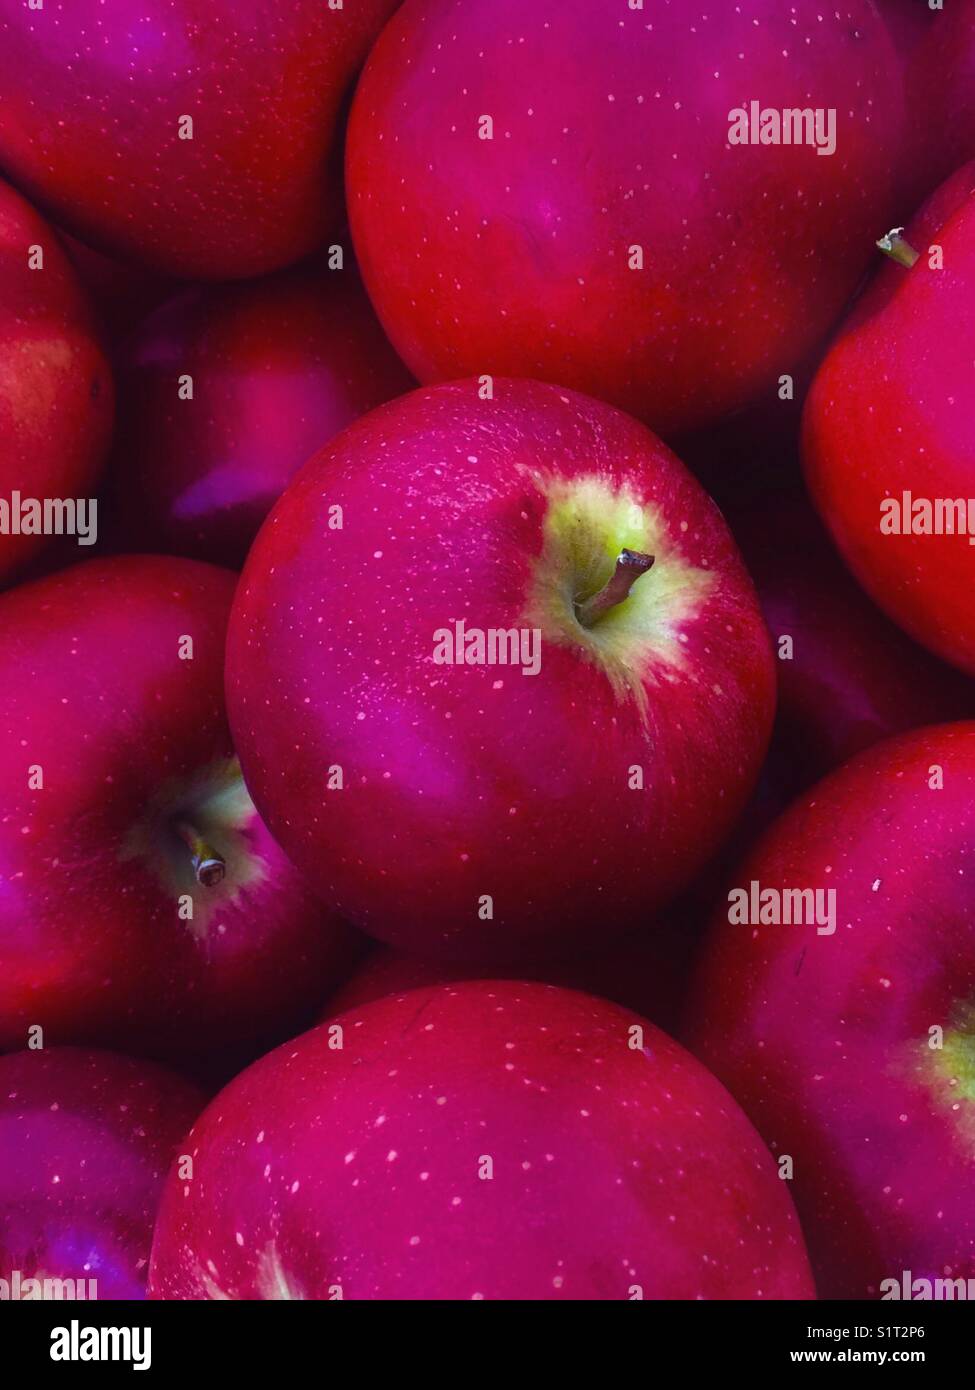 Ruby Red Ruby Frost New York State Apples Stock Photo